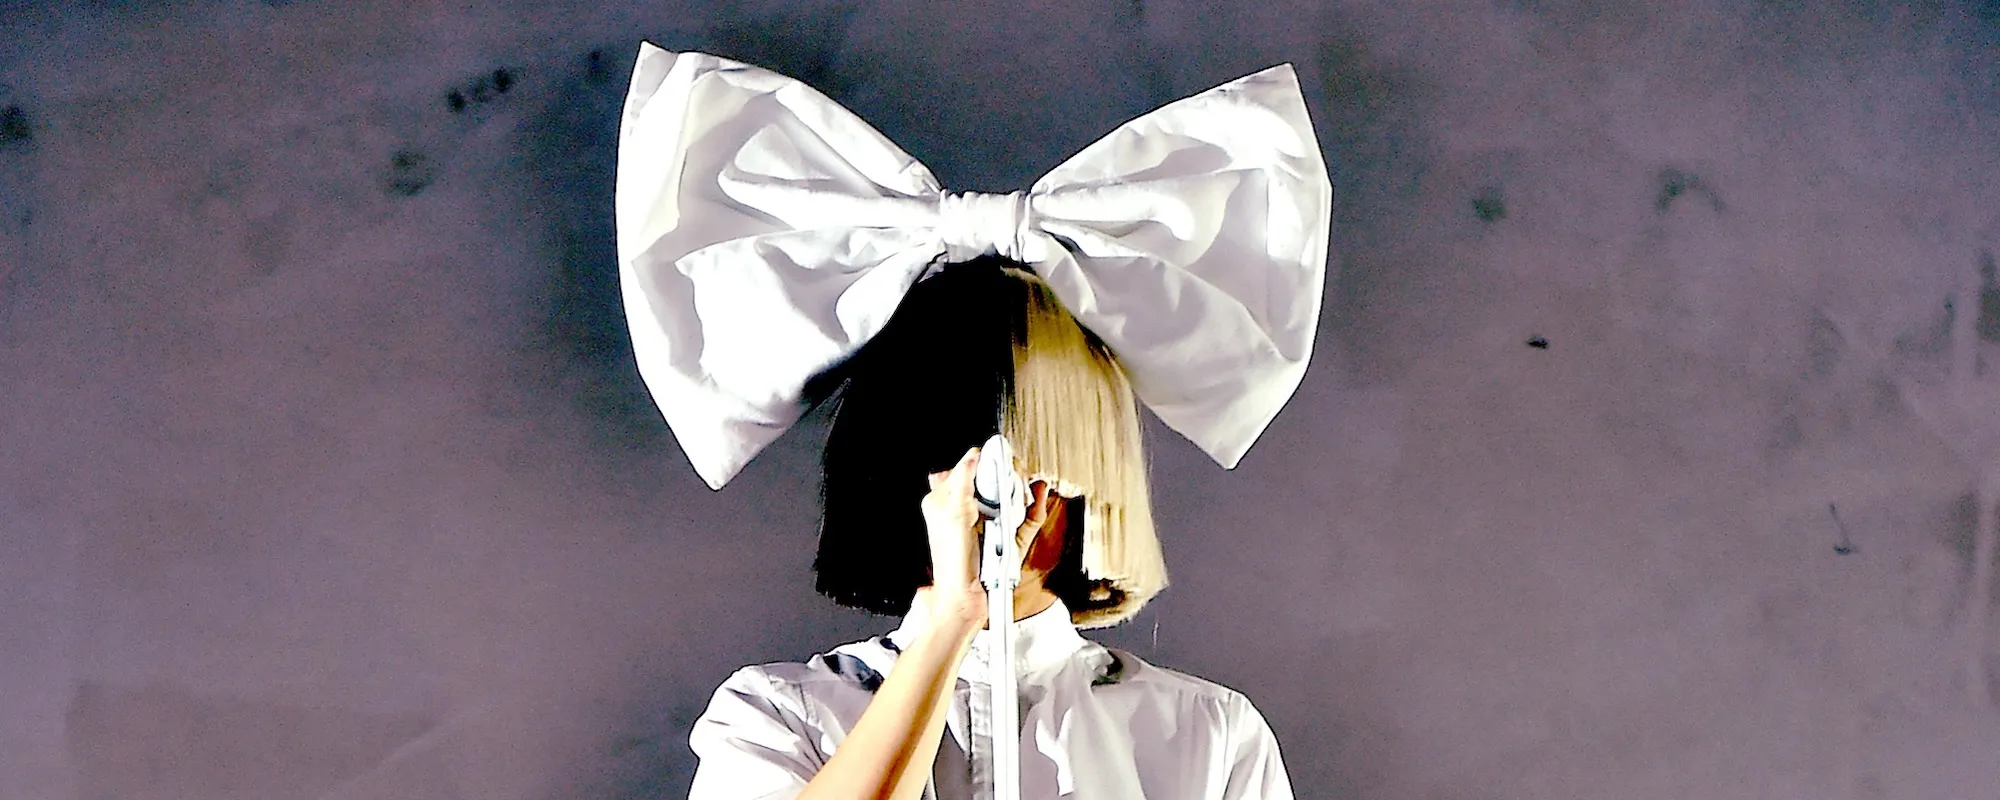 From “Titanium” to “Dance Alone”: 5 of Sia’s Most Addictive Collaborations